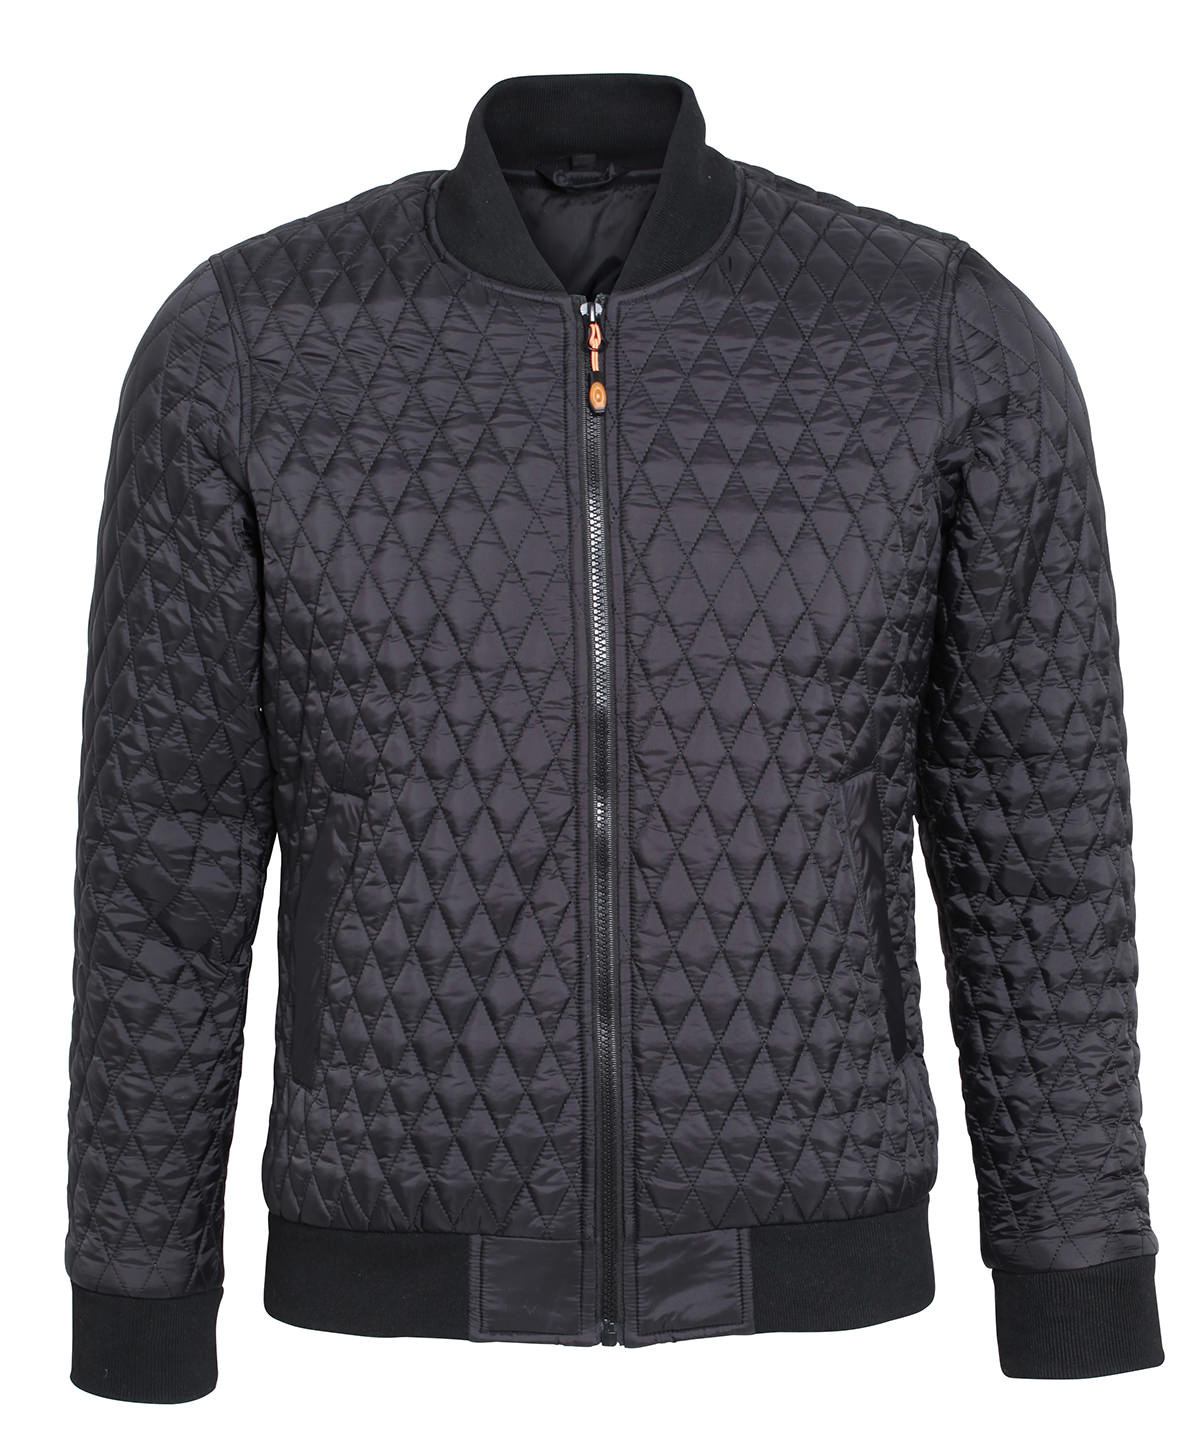 Women’s quilted flight jacket – AVM Workwear and Embroidery Ltd